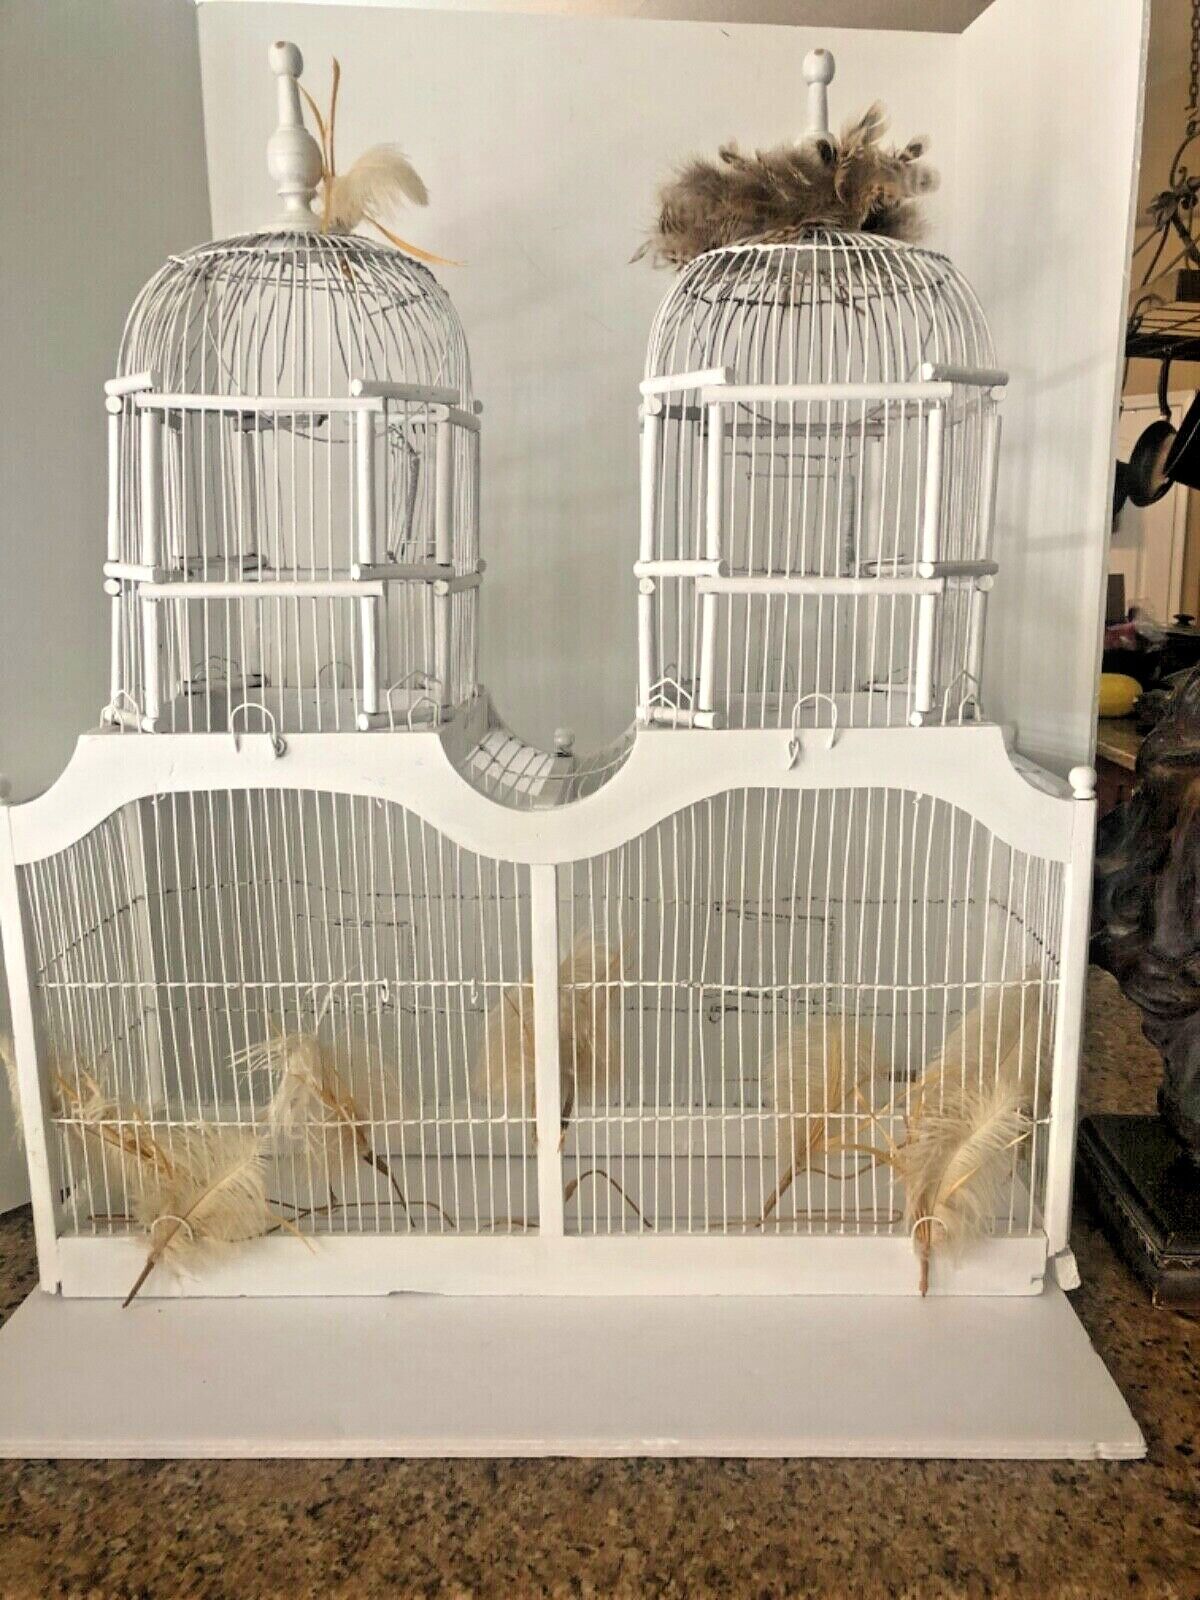 VINTAGE VICTORIAN STYLE COLLECTIBLE DECORATIVE BEAUTIFUL WHITE BIRD CAGE 27”X31”